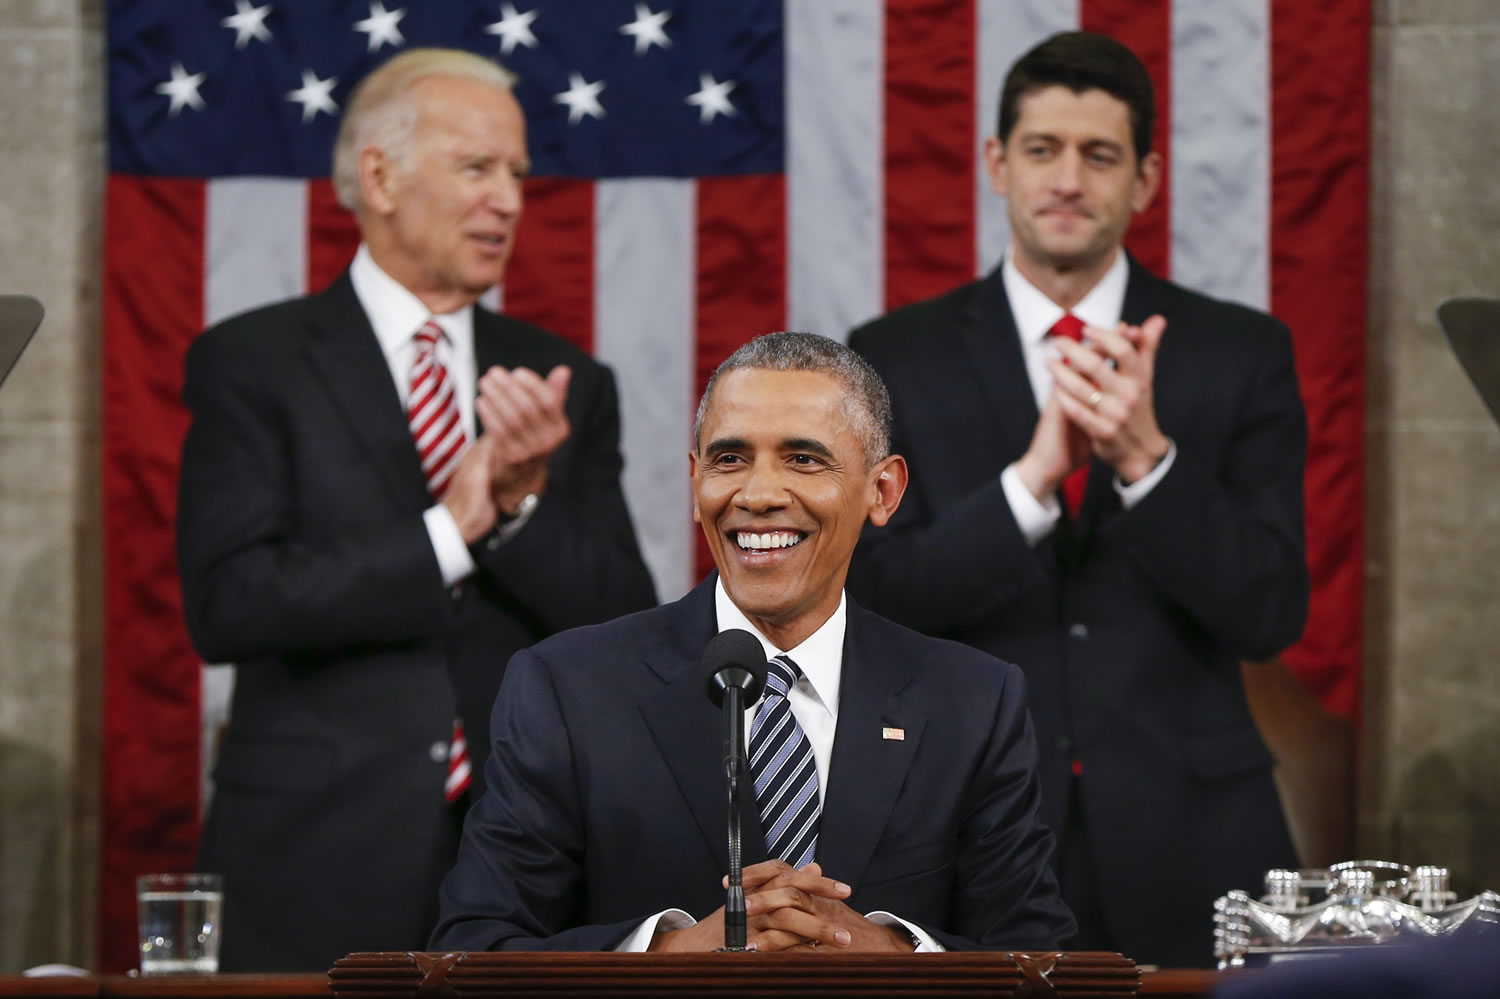 Vice President Joe Biden and Speaker Paul Ryan of Wisconsin applaud President Barack Obama on Tuesday during the State of the Union address before a joint session of Congress on Capitol Hill in Washington.